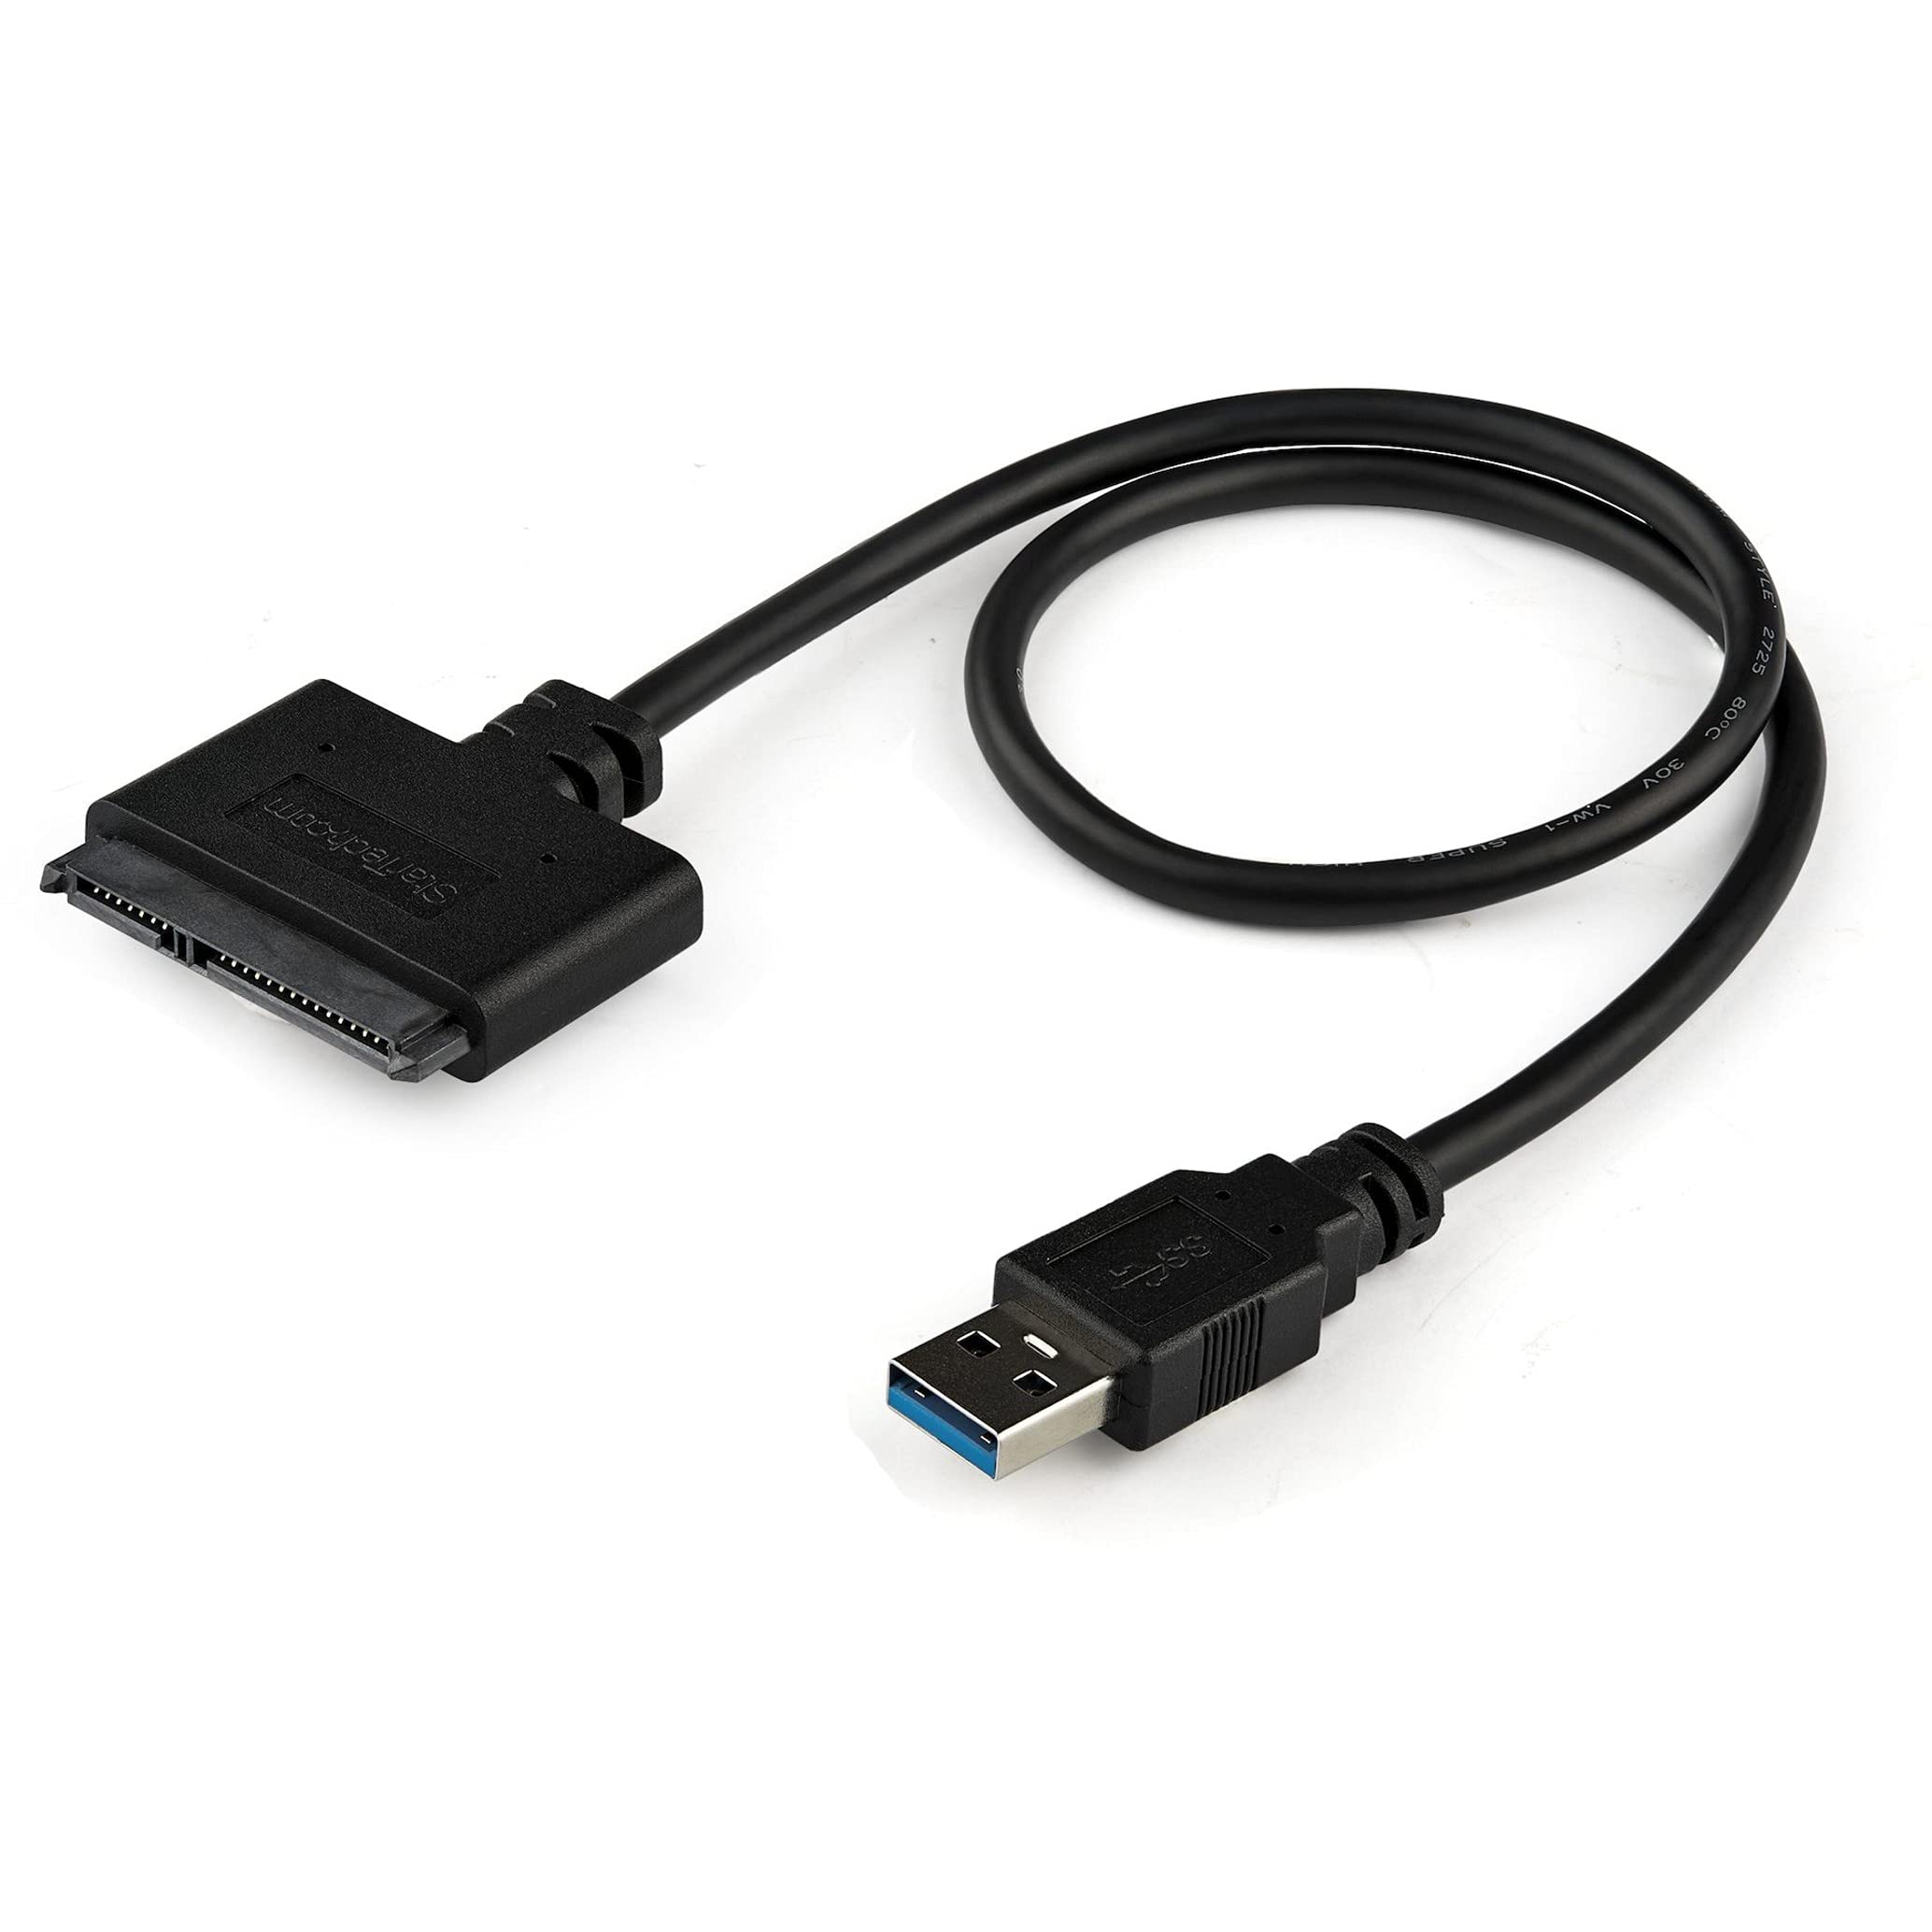 Ensure that all cables connecting the storage device are secure and undamaged.
If using an external drive, try connecting it to a different USB port or computer to rule out a connection issue.